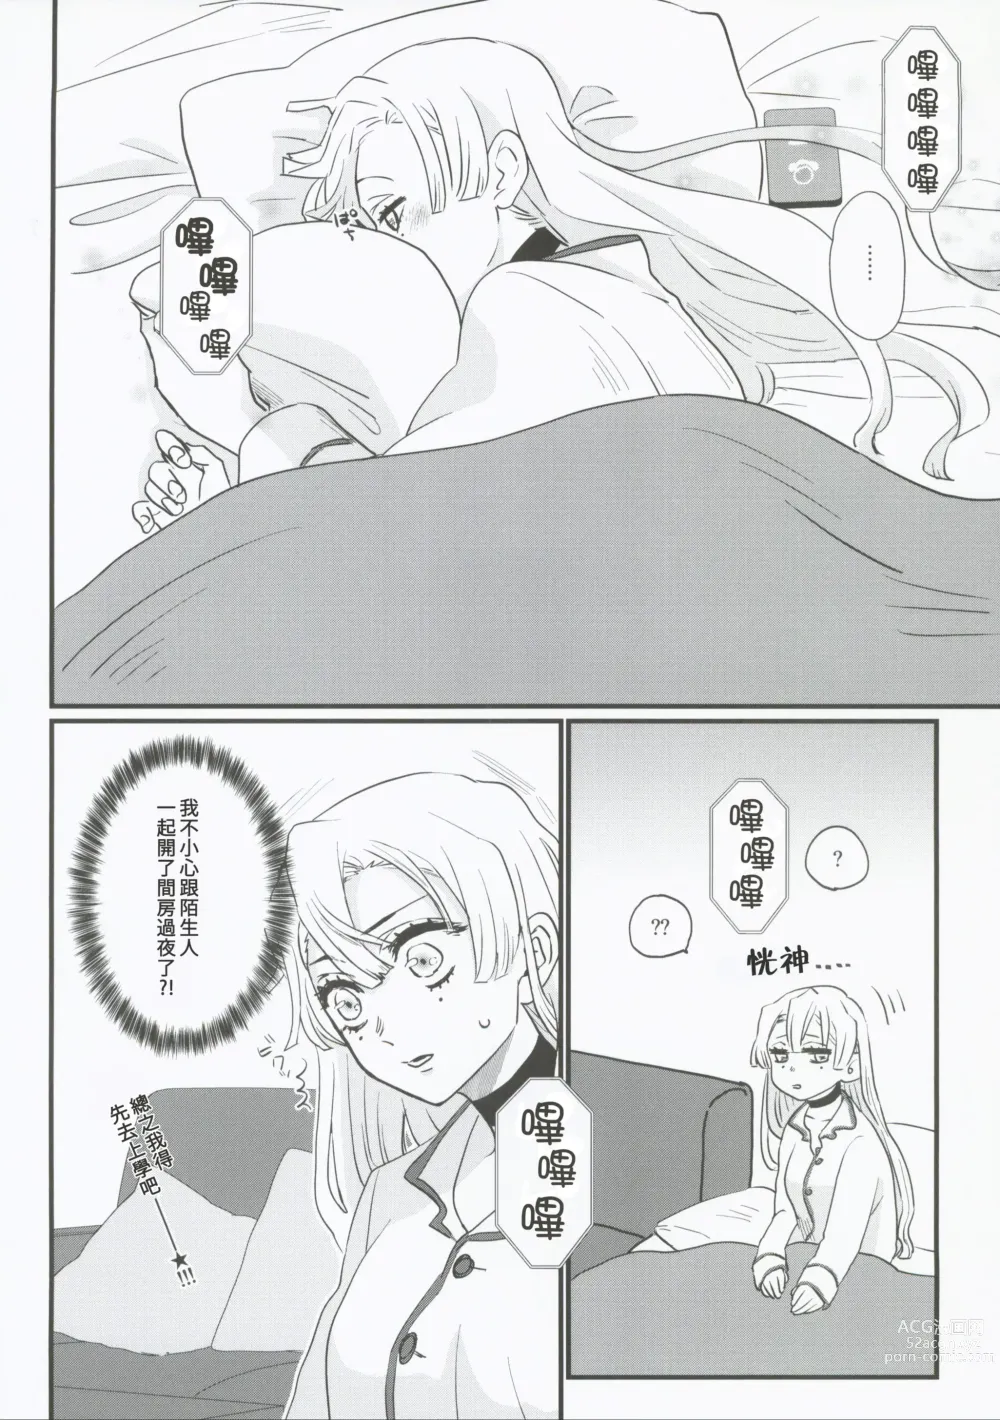 Page 12 of doujinshi 屬於妳的Omega